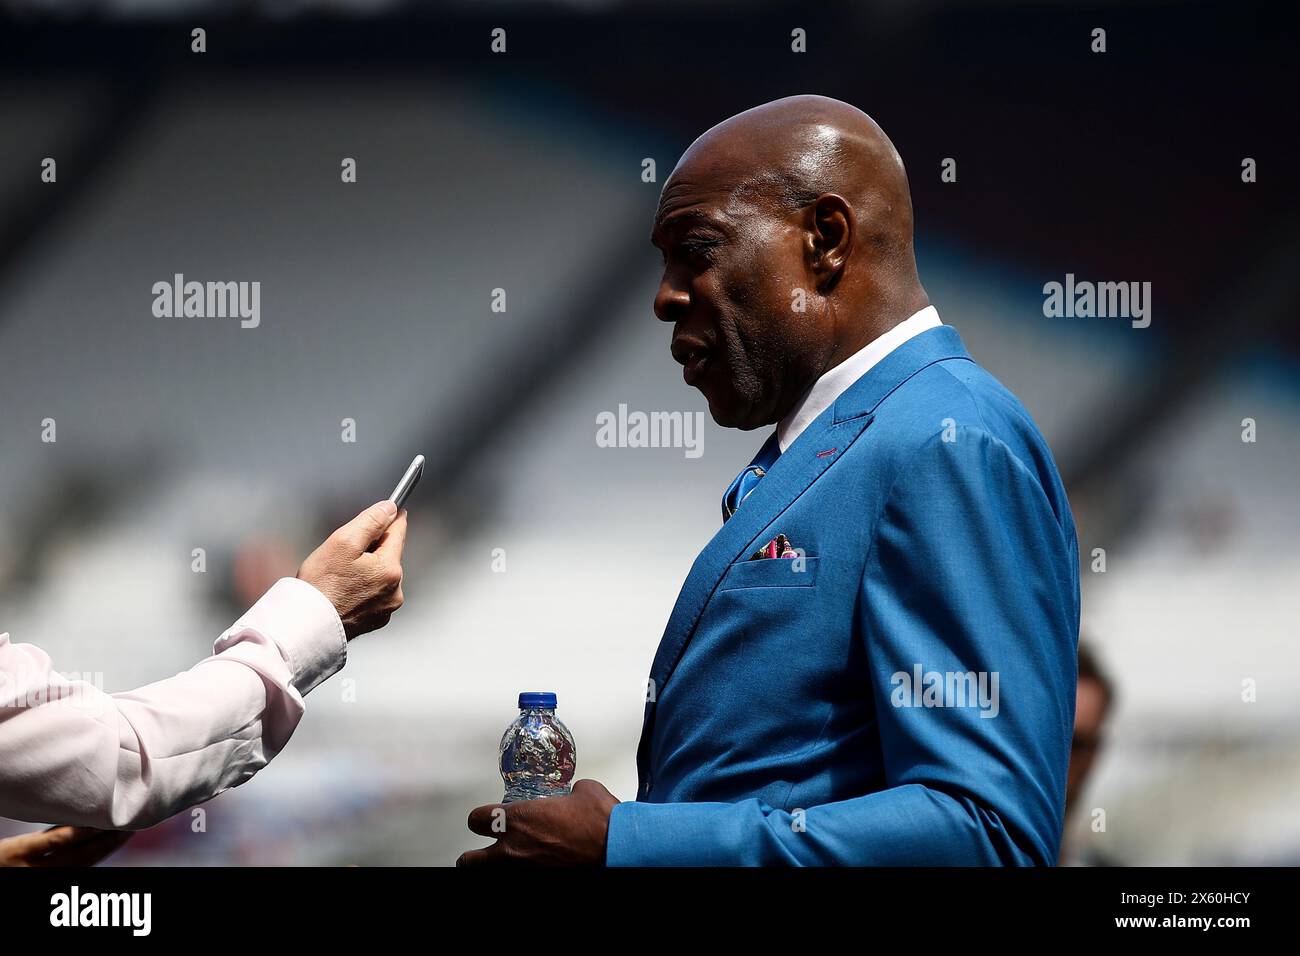 London Stadium, Stratford on Saturday 11th May 2024. Former boxer Frank Bruno during the Premier League match between West Ham United and Luton Town at the London Stadium, Stratford on Saturday 11th May 2024. (Photo: Tom West | MI News) Credit: MI News & Sport /Alamy Live News Stock Photo